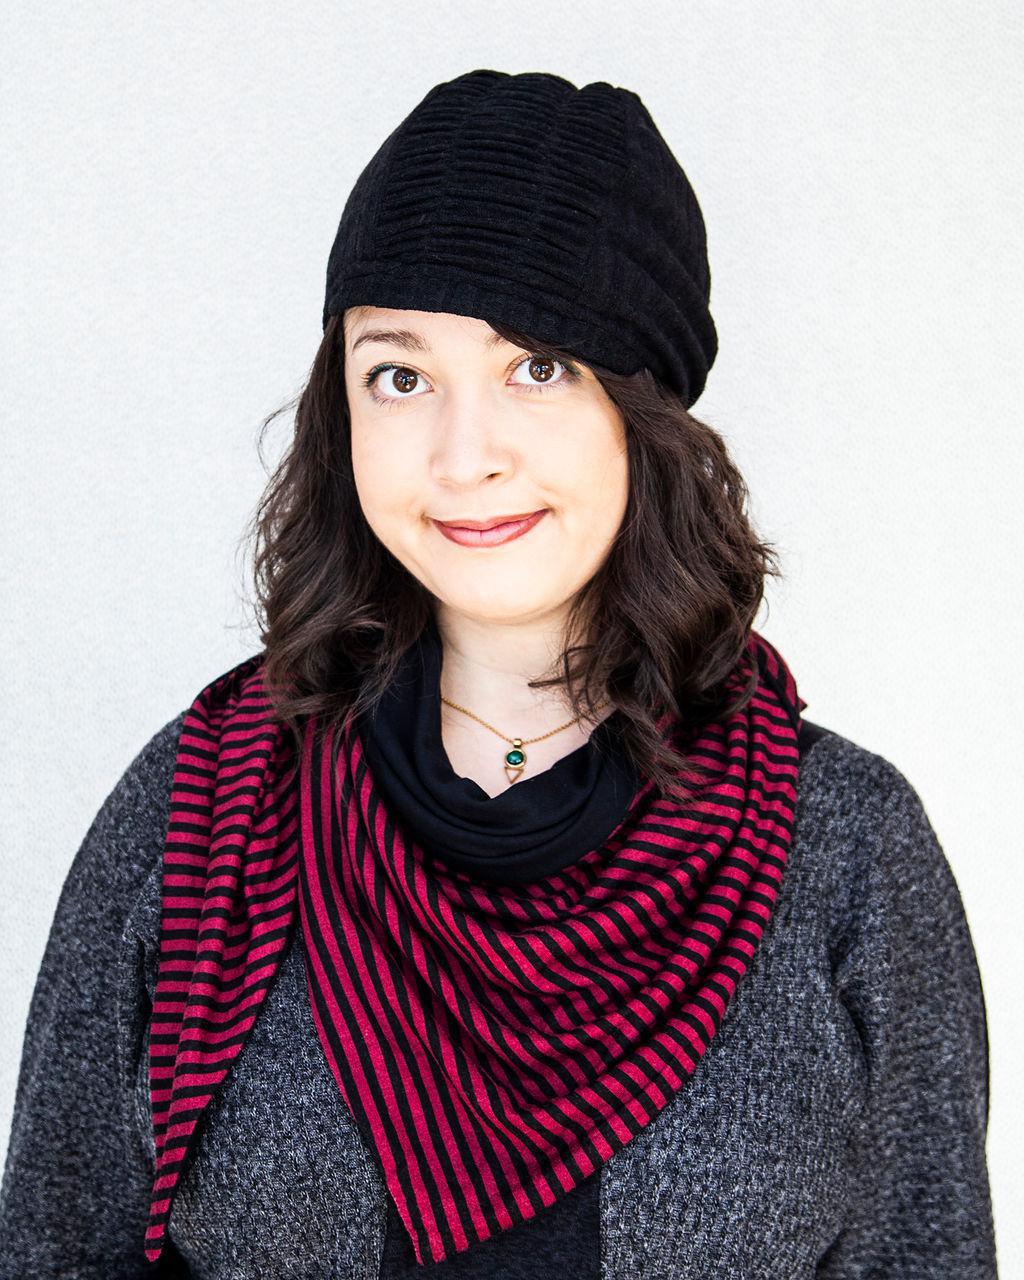 Squasht Slouch Hat in Solid Black Sweater Knit - SALE